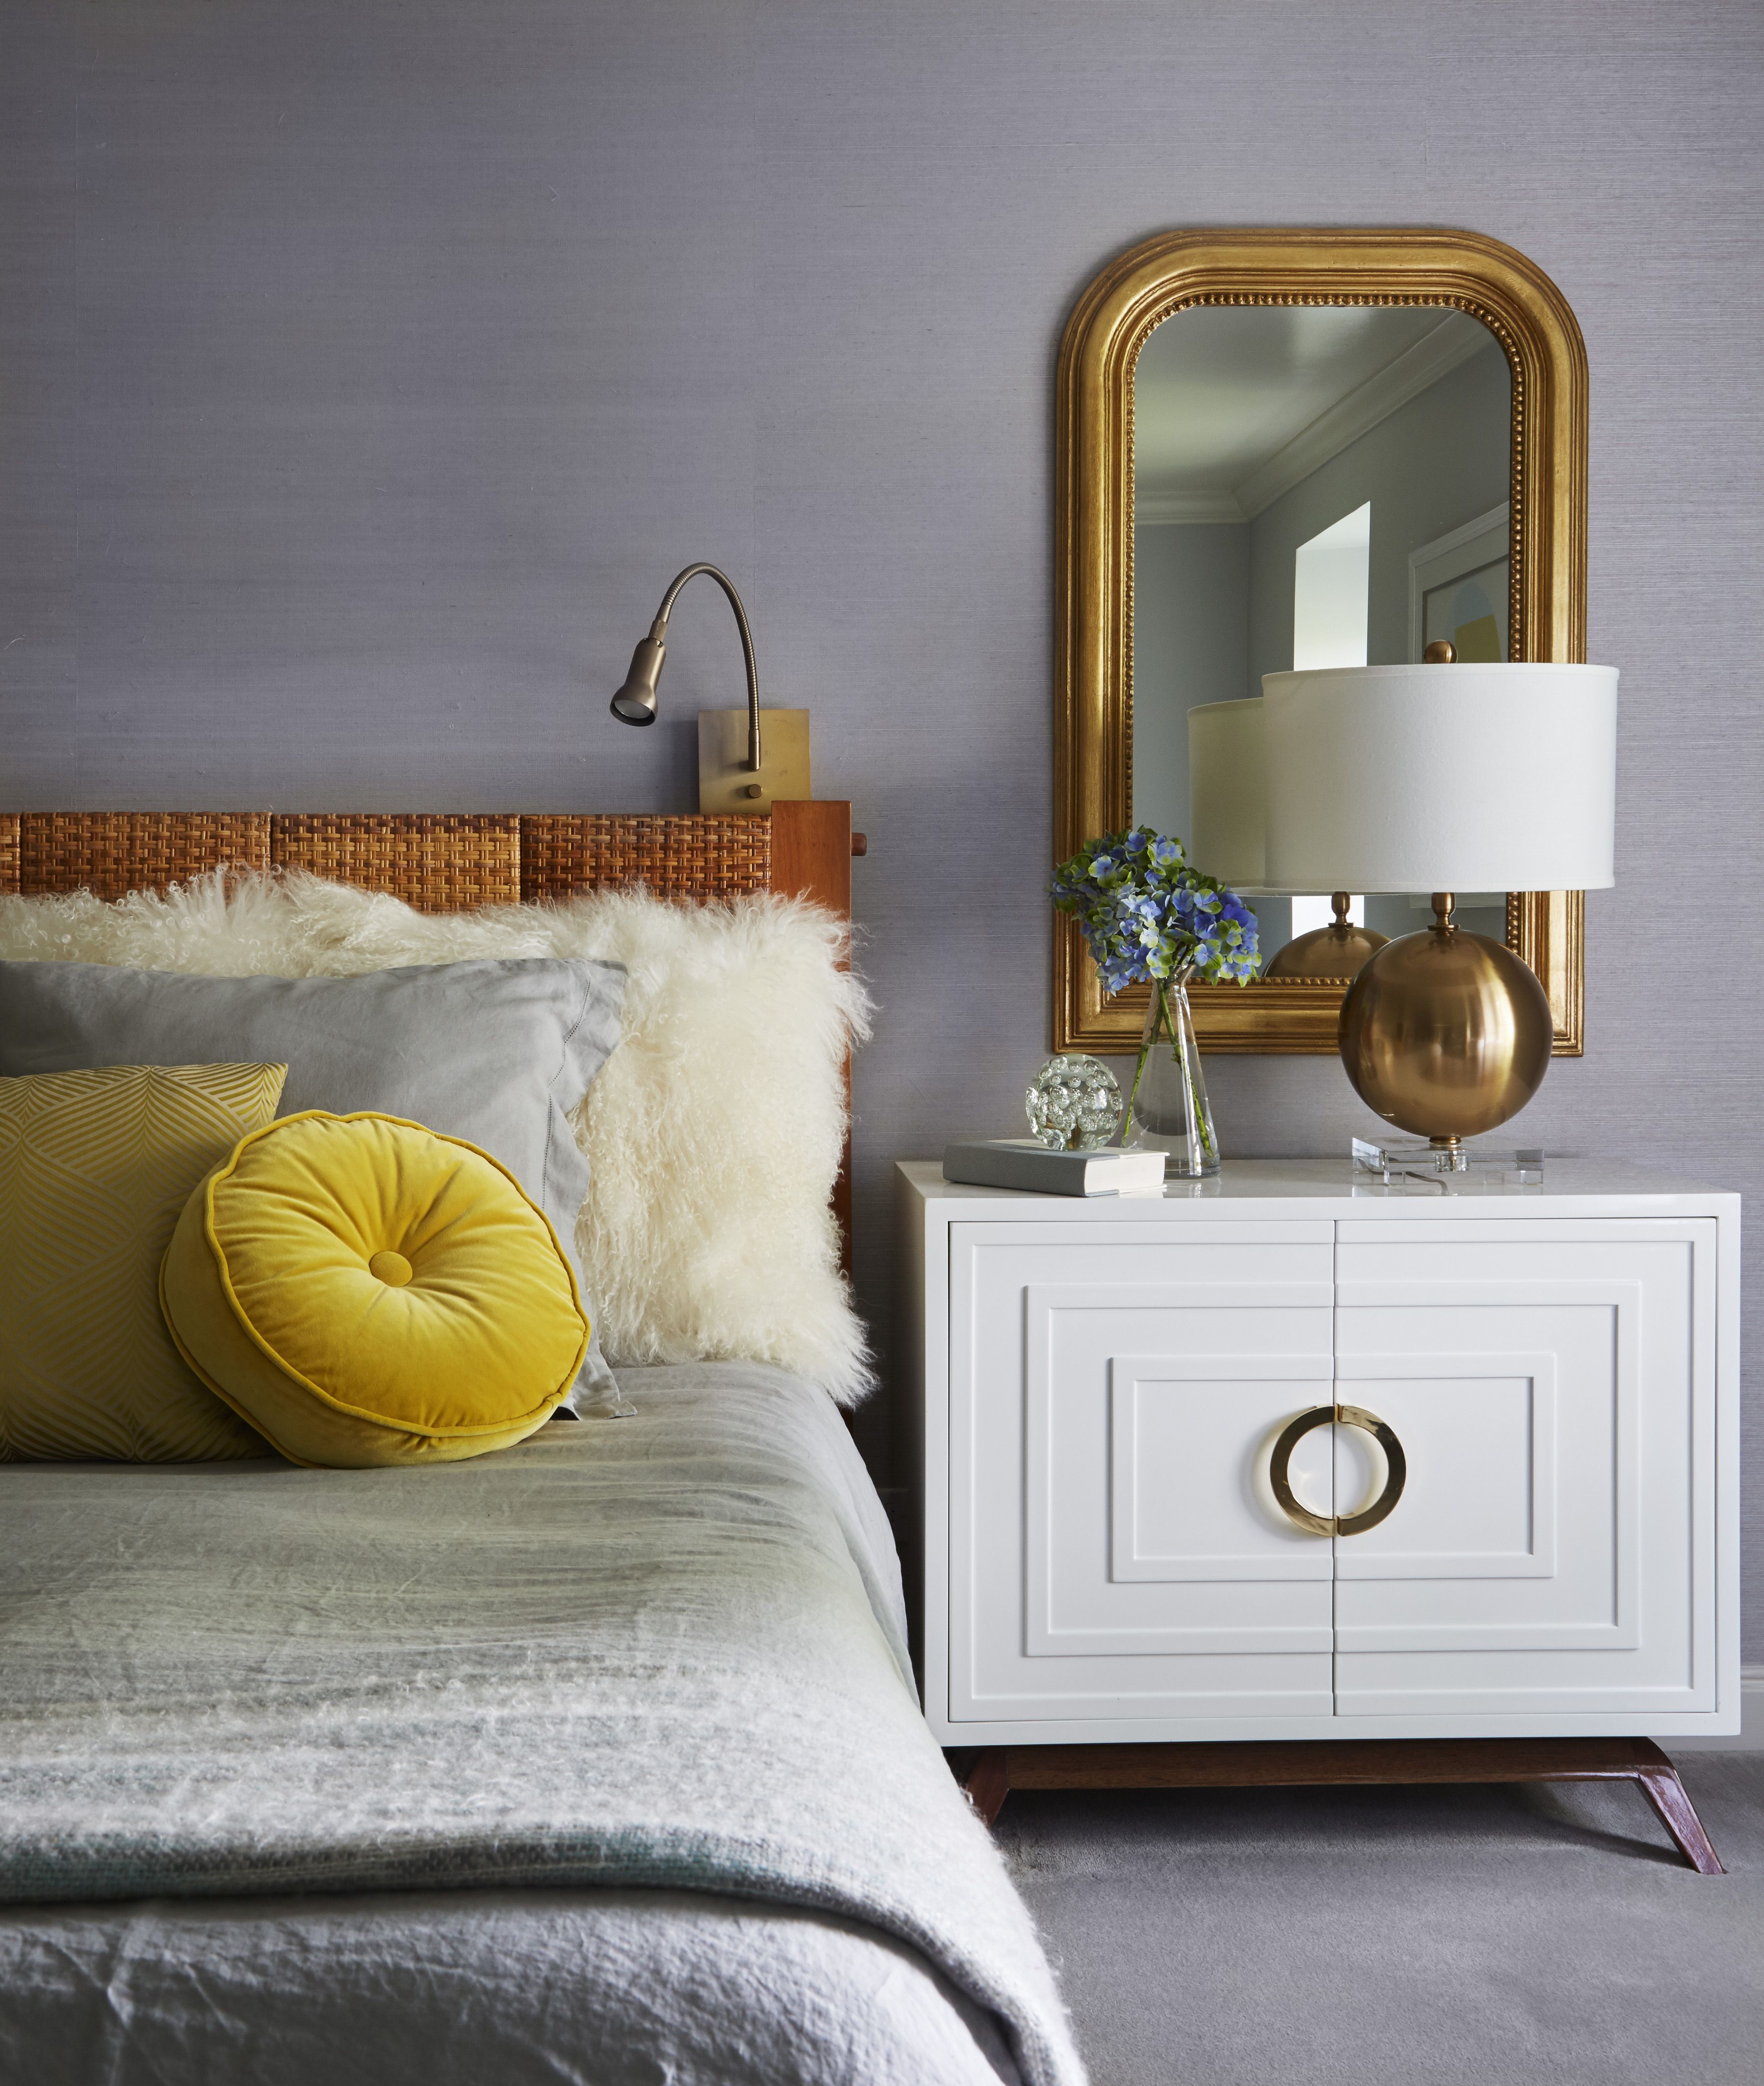 35 Bedside Tables For Your Bedroom\'s Decor - Best Nightstand ...